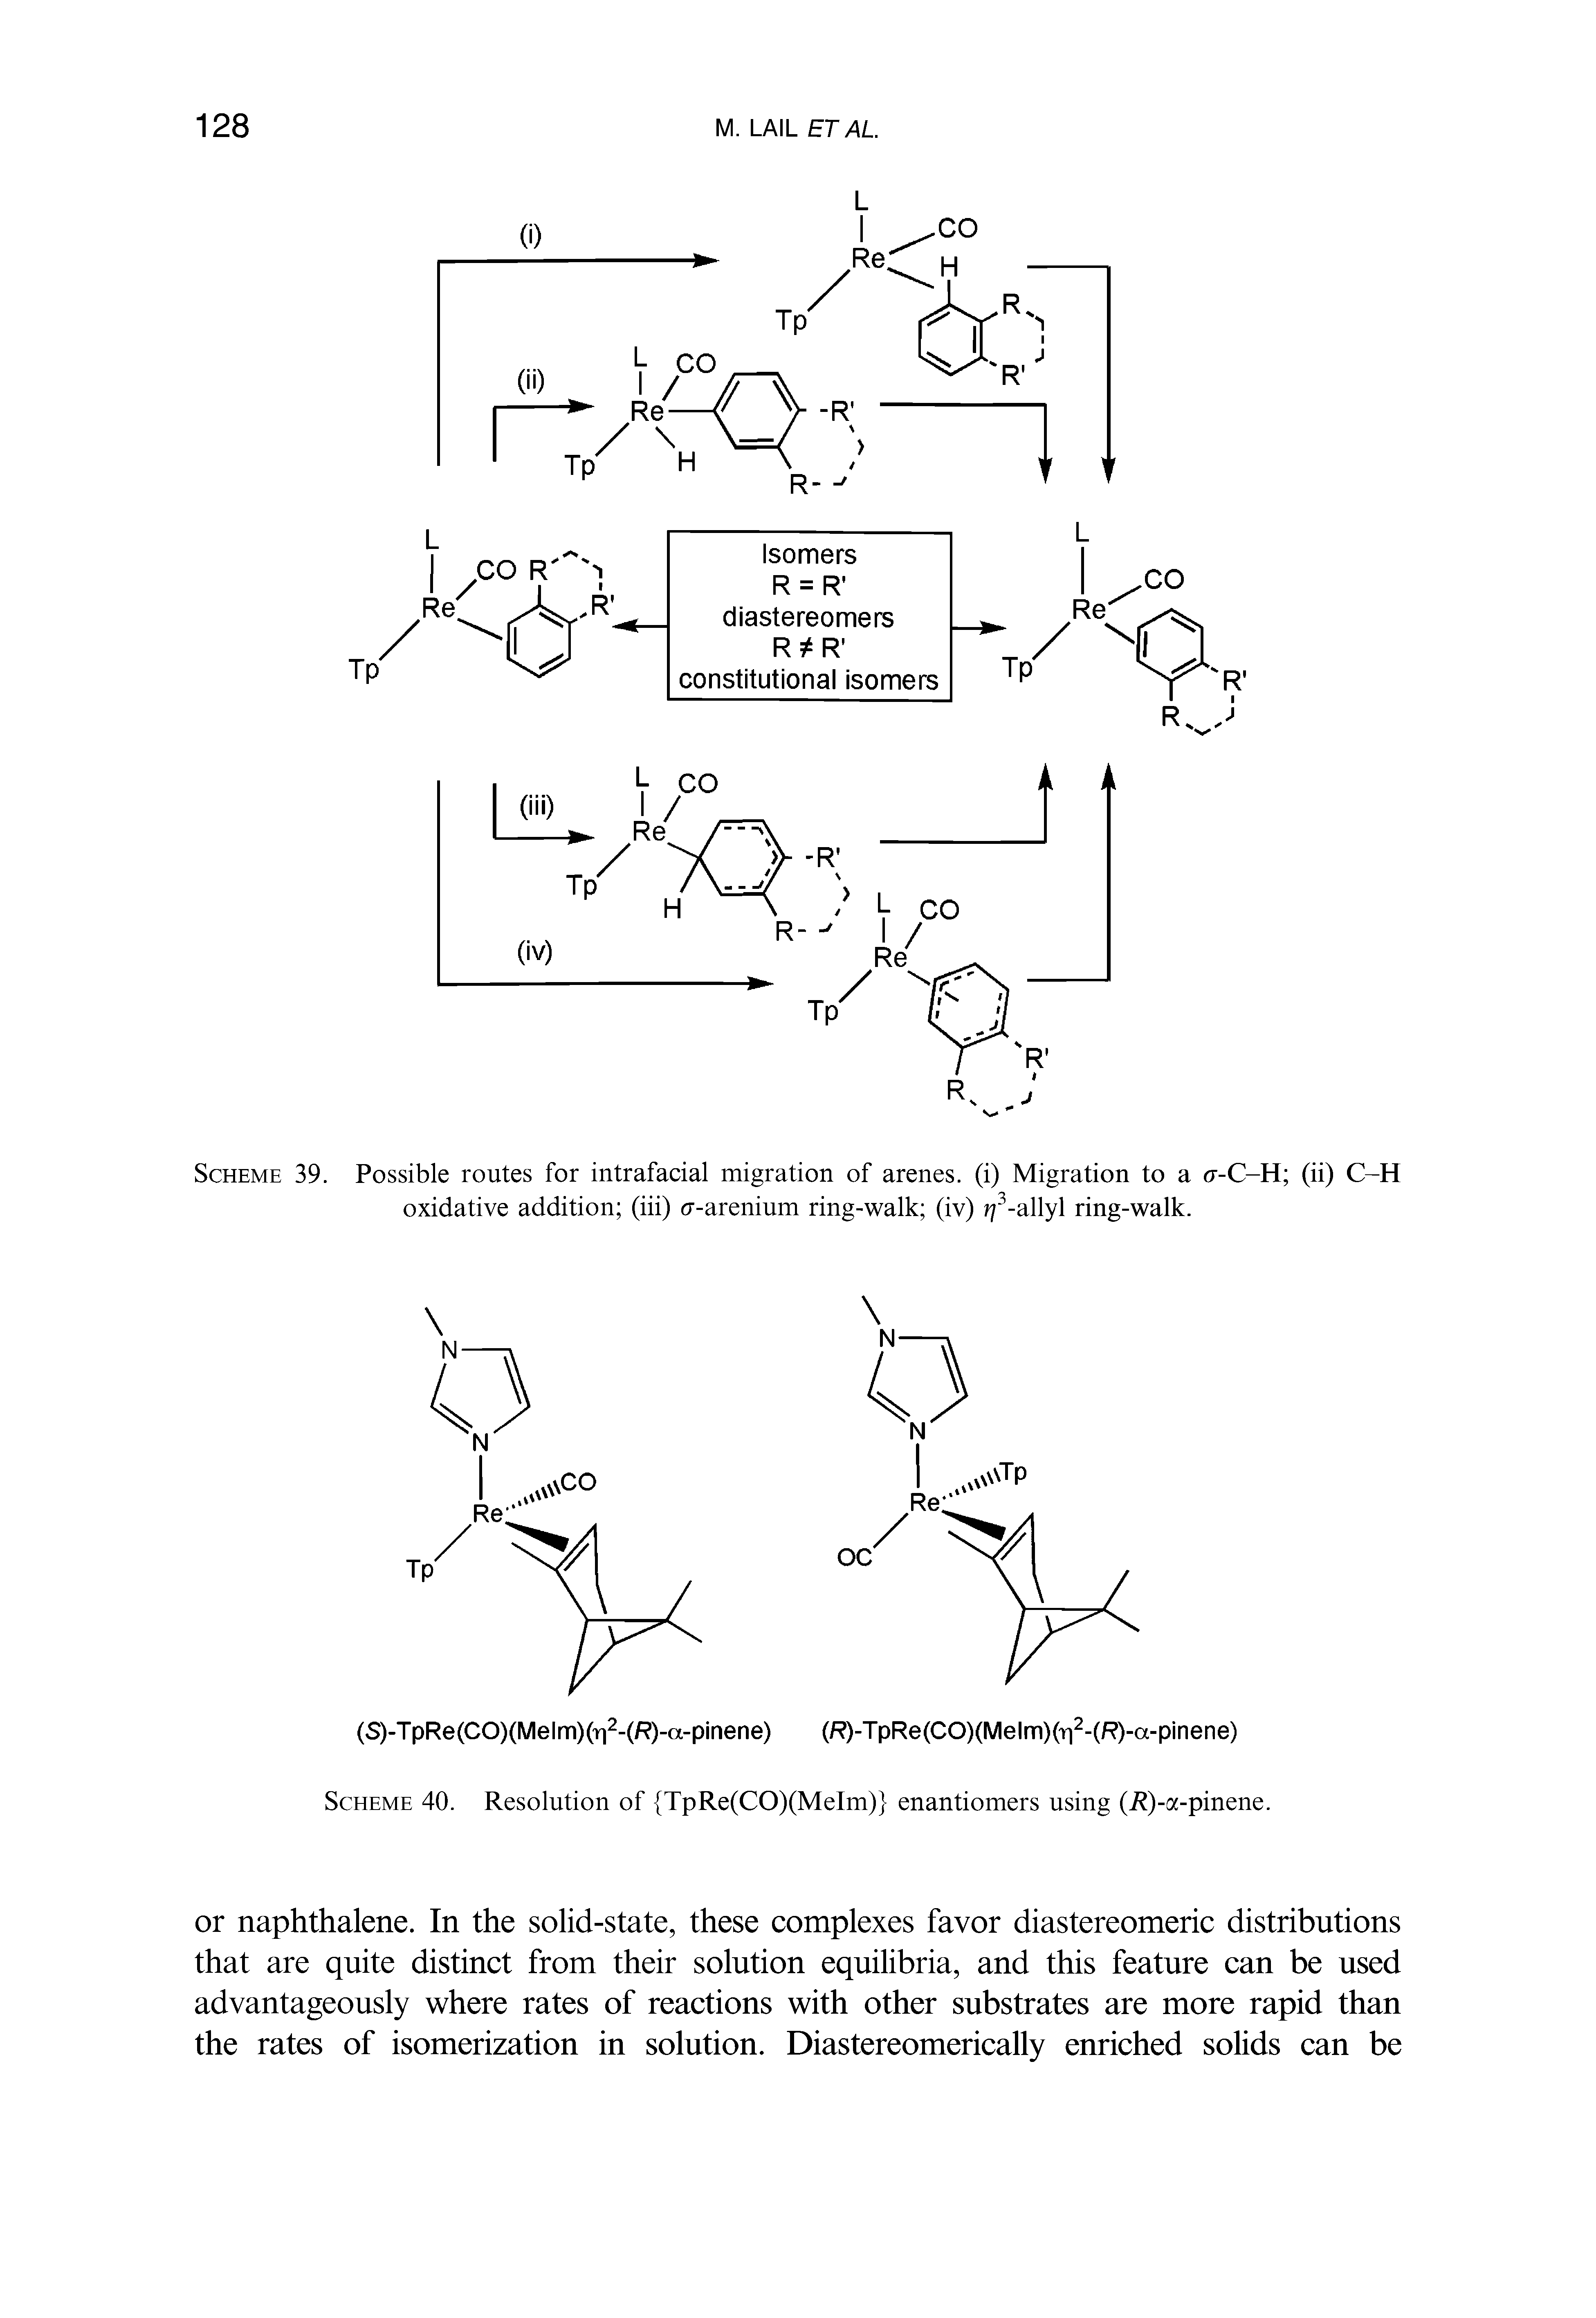 Scheme 39. Possible routes for intrafacial migration of arenes. (i) Migration to a c-C-H (ii) C-H oxidative addition (iii) cr-arenium ring-walk (iv) f/ -allyl ring-walk.